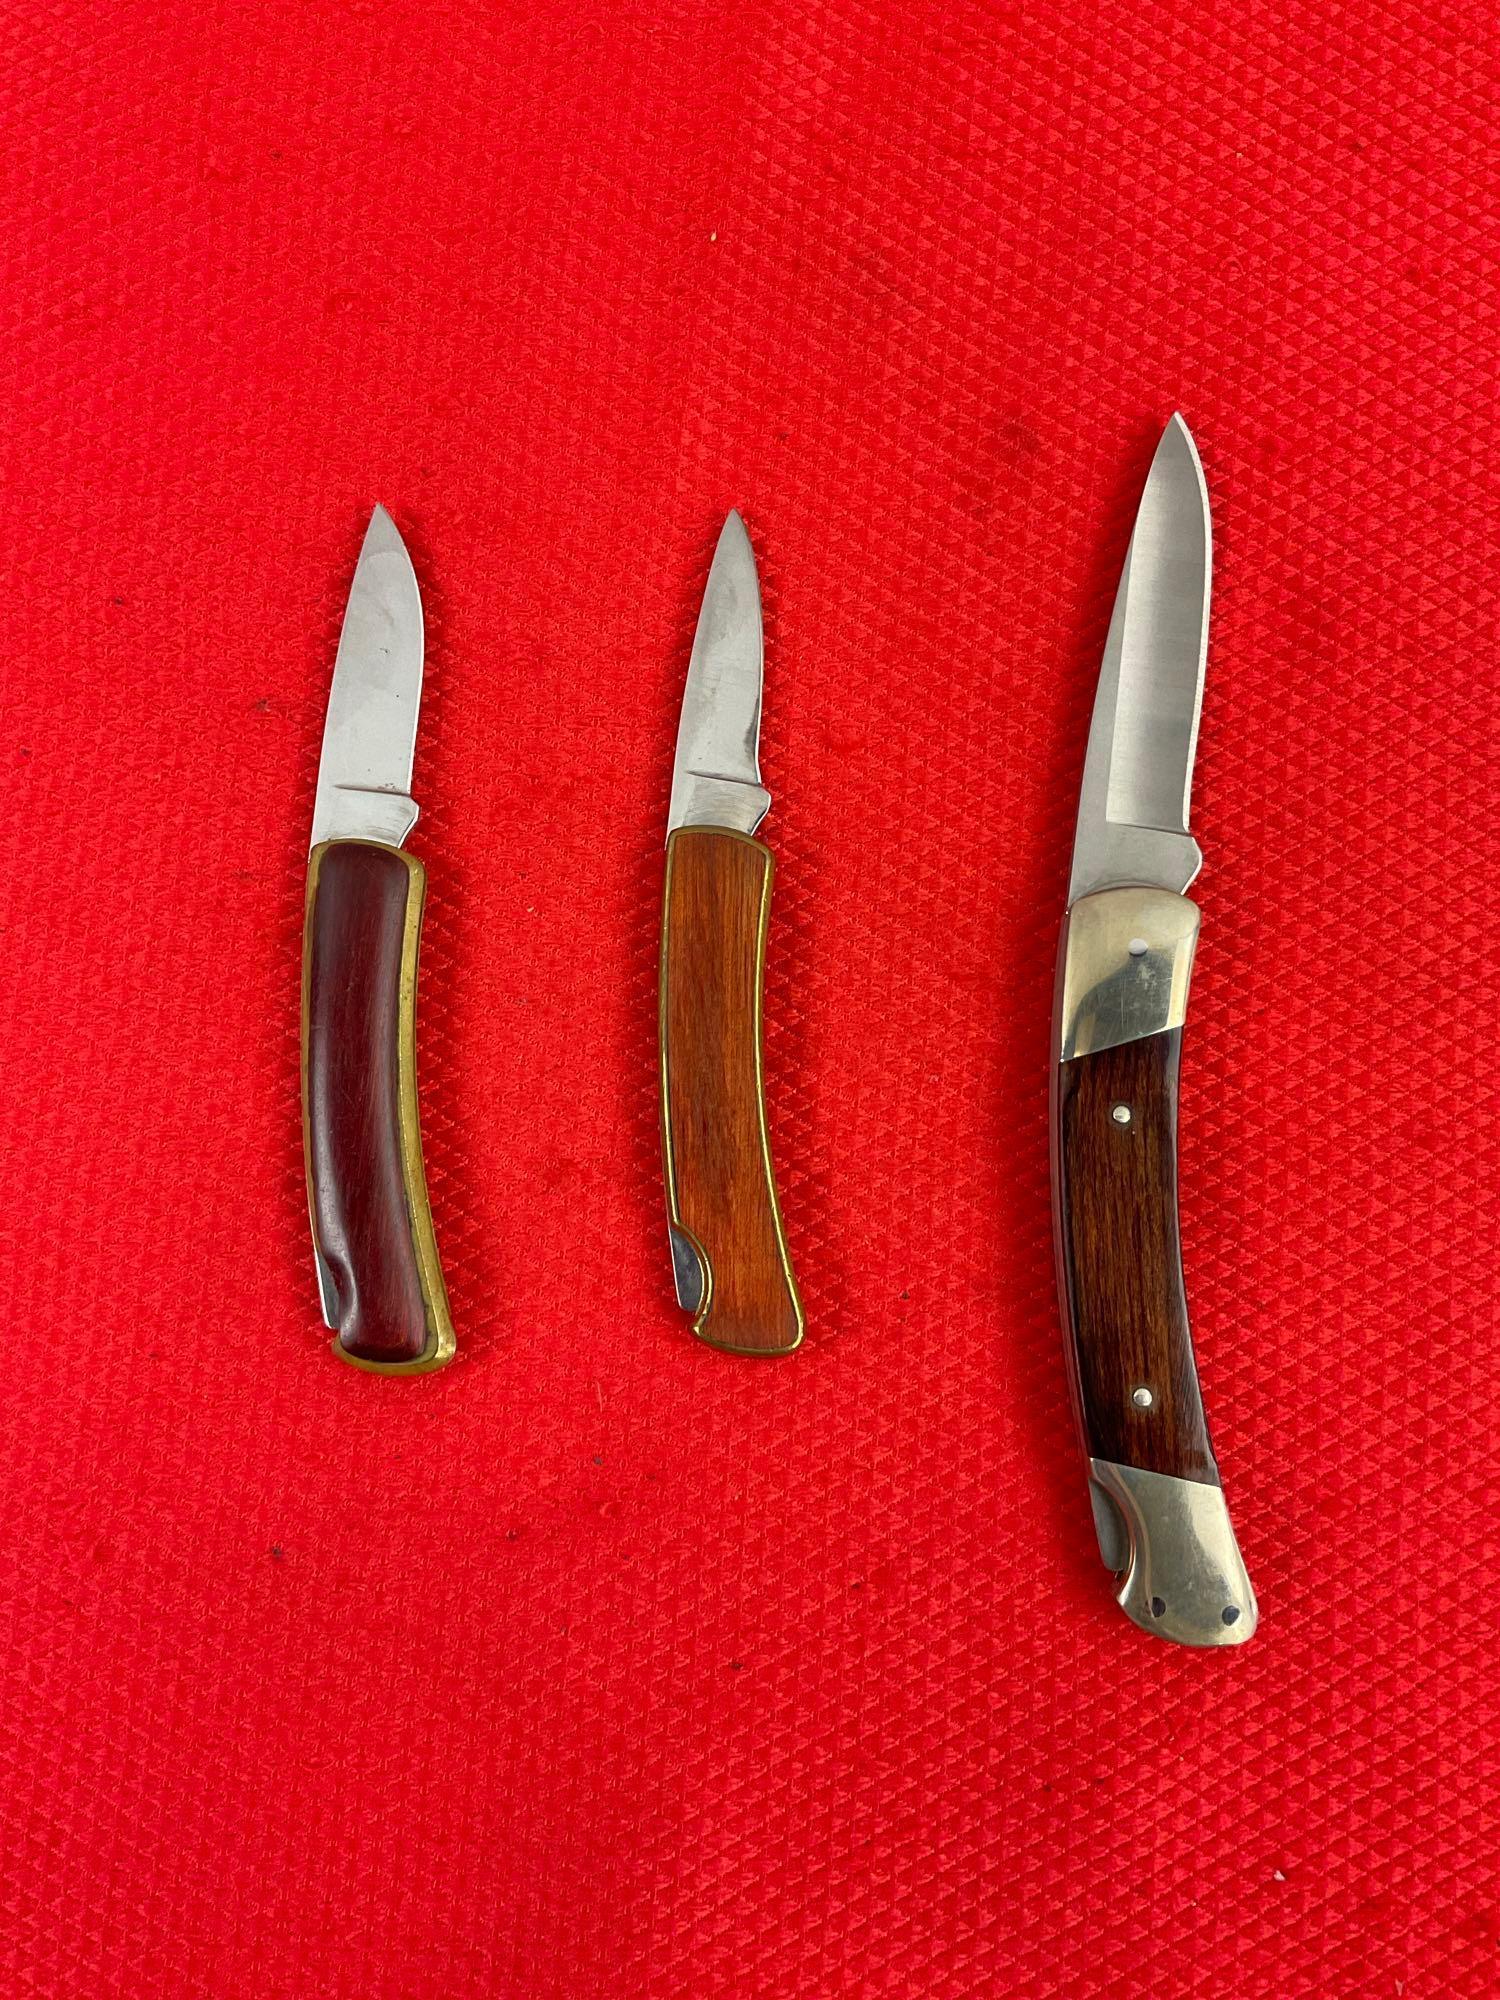 3 pcs Buck Steel Folding Blade Collectible Pocket Knives Models 527 The Treasury & 501 Squire. See